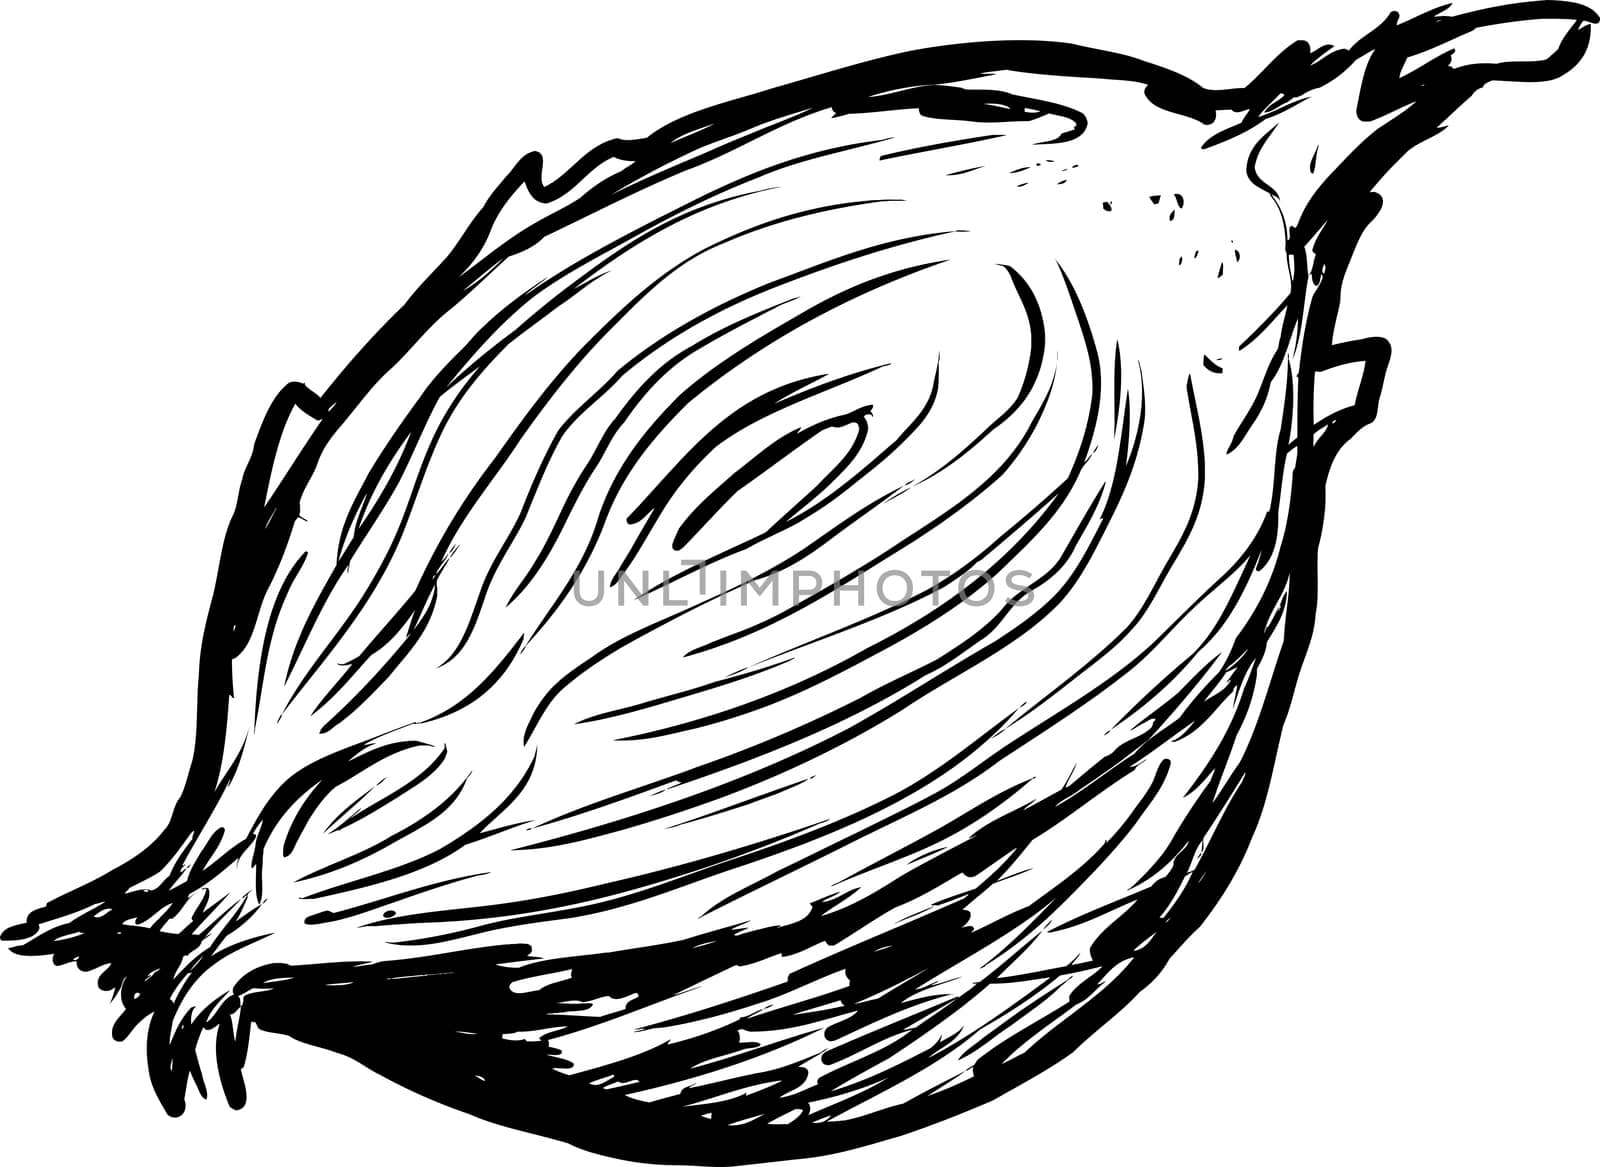 Hand drawn outline of single raw onion cut in half over white background